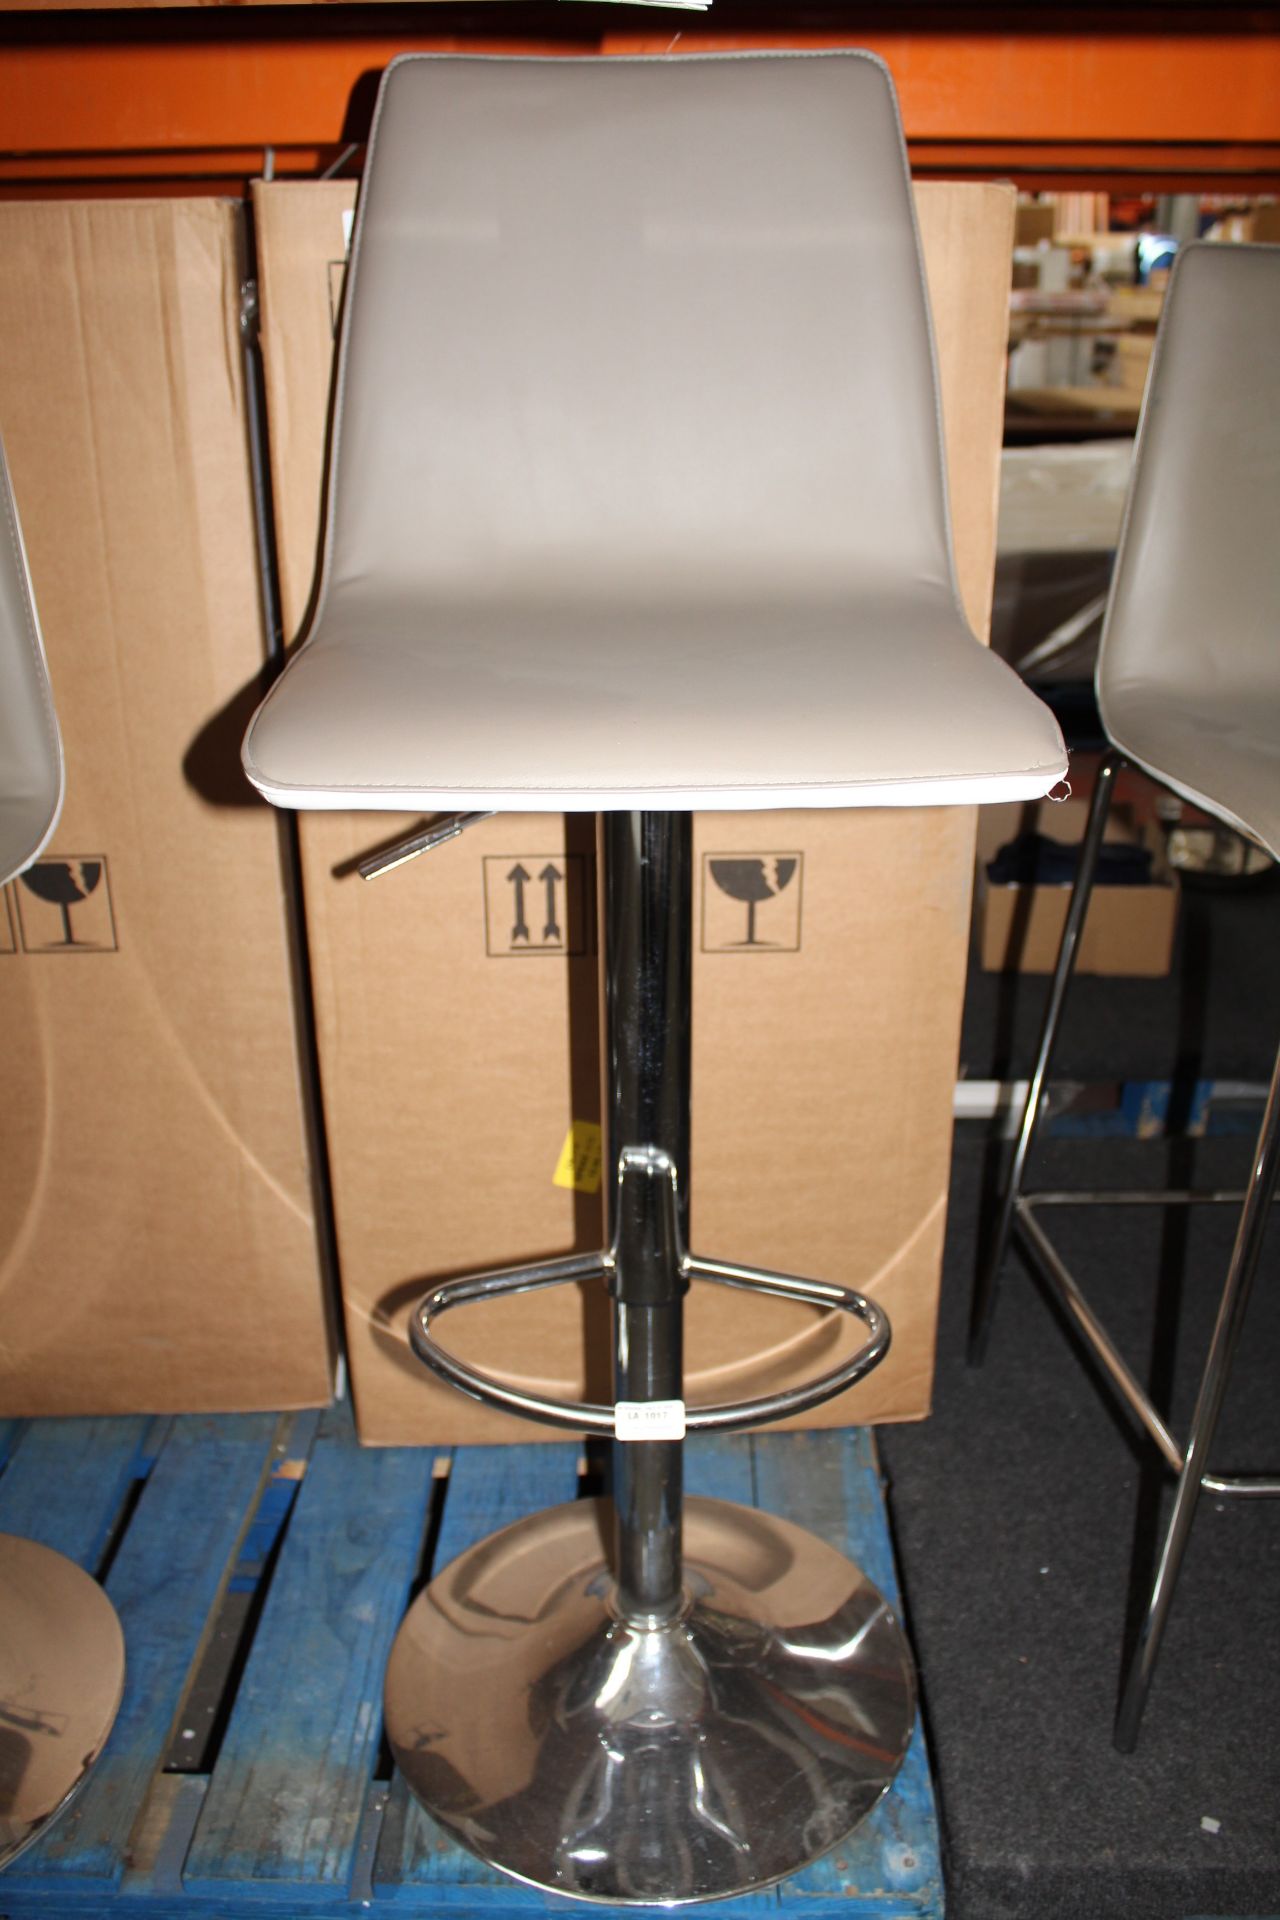 1 x XAVIER BAR STOOL RRP £200 (12.04.18) *PLEASE NOTE THAT THE BID PRICE IS MULTIPLIED BY THE NUMBER